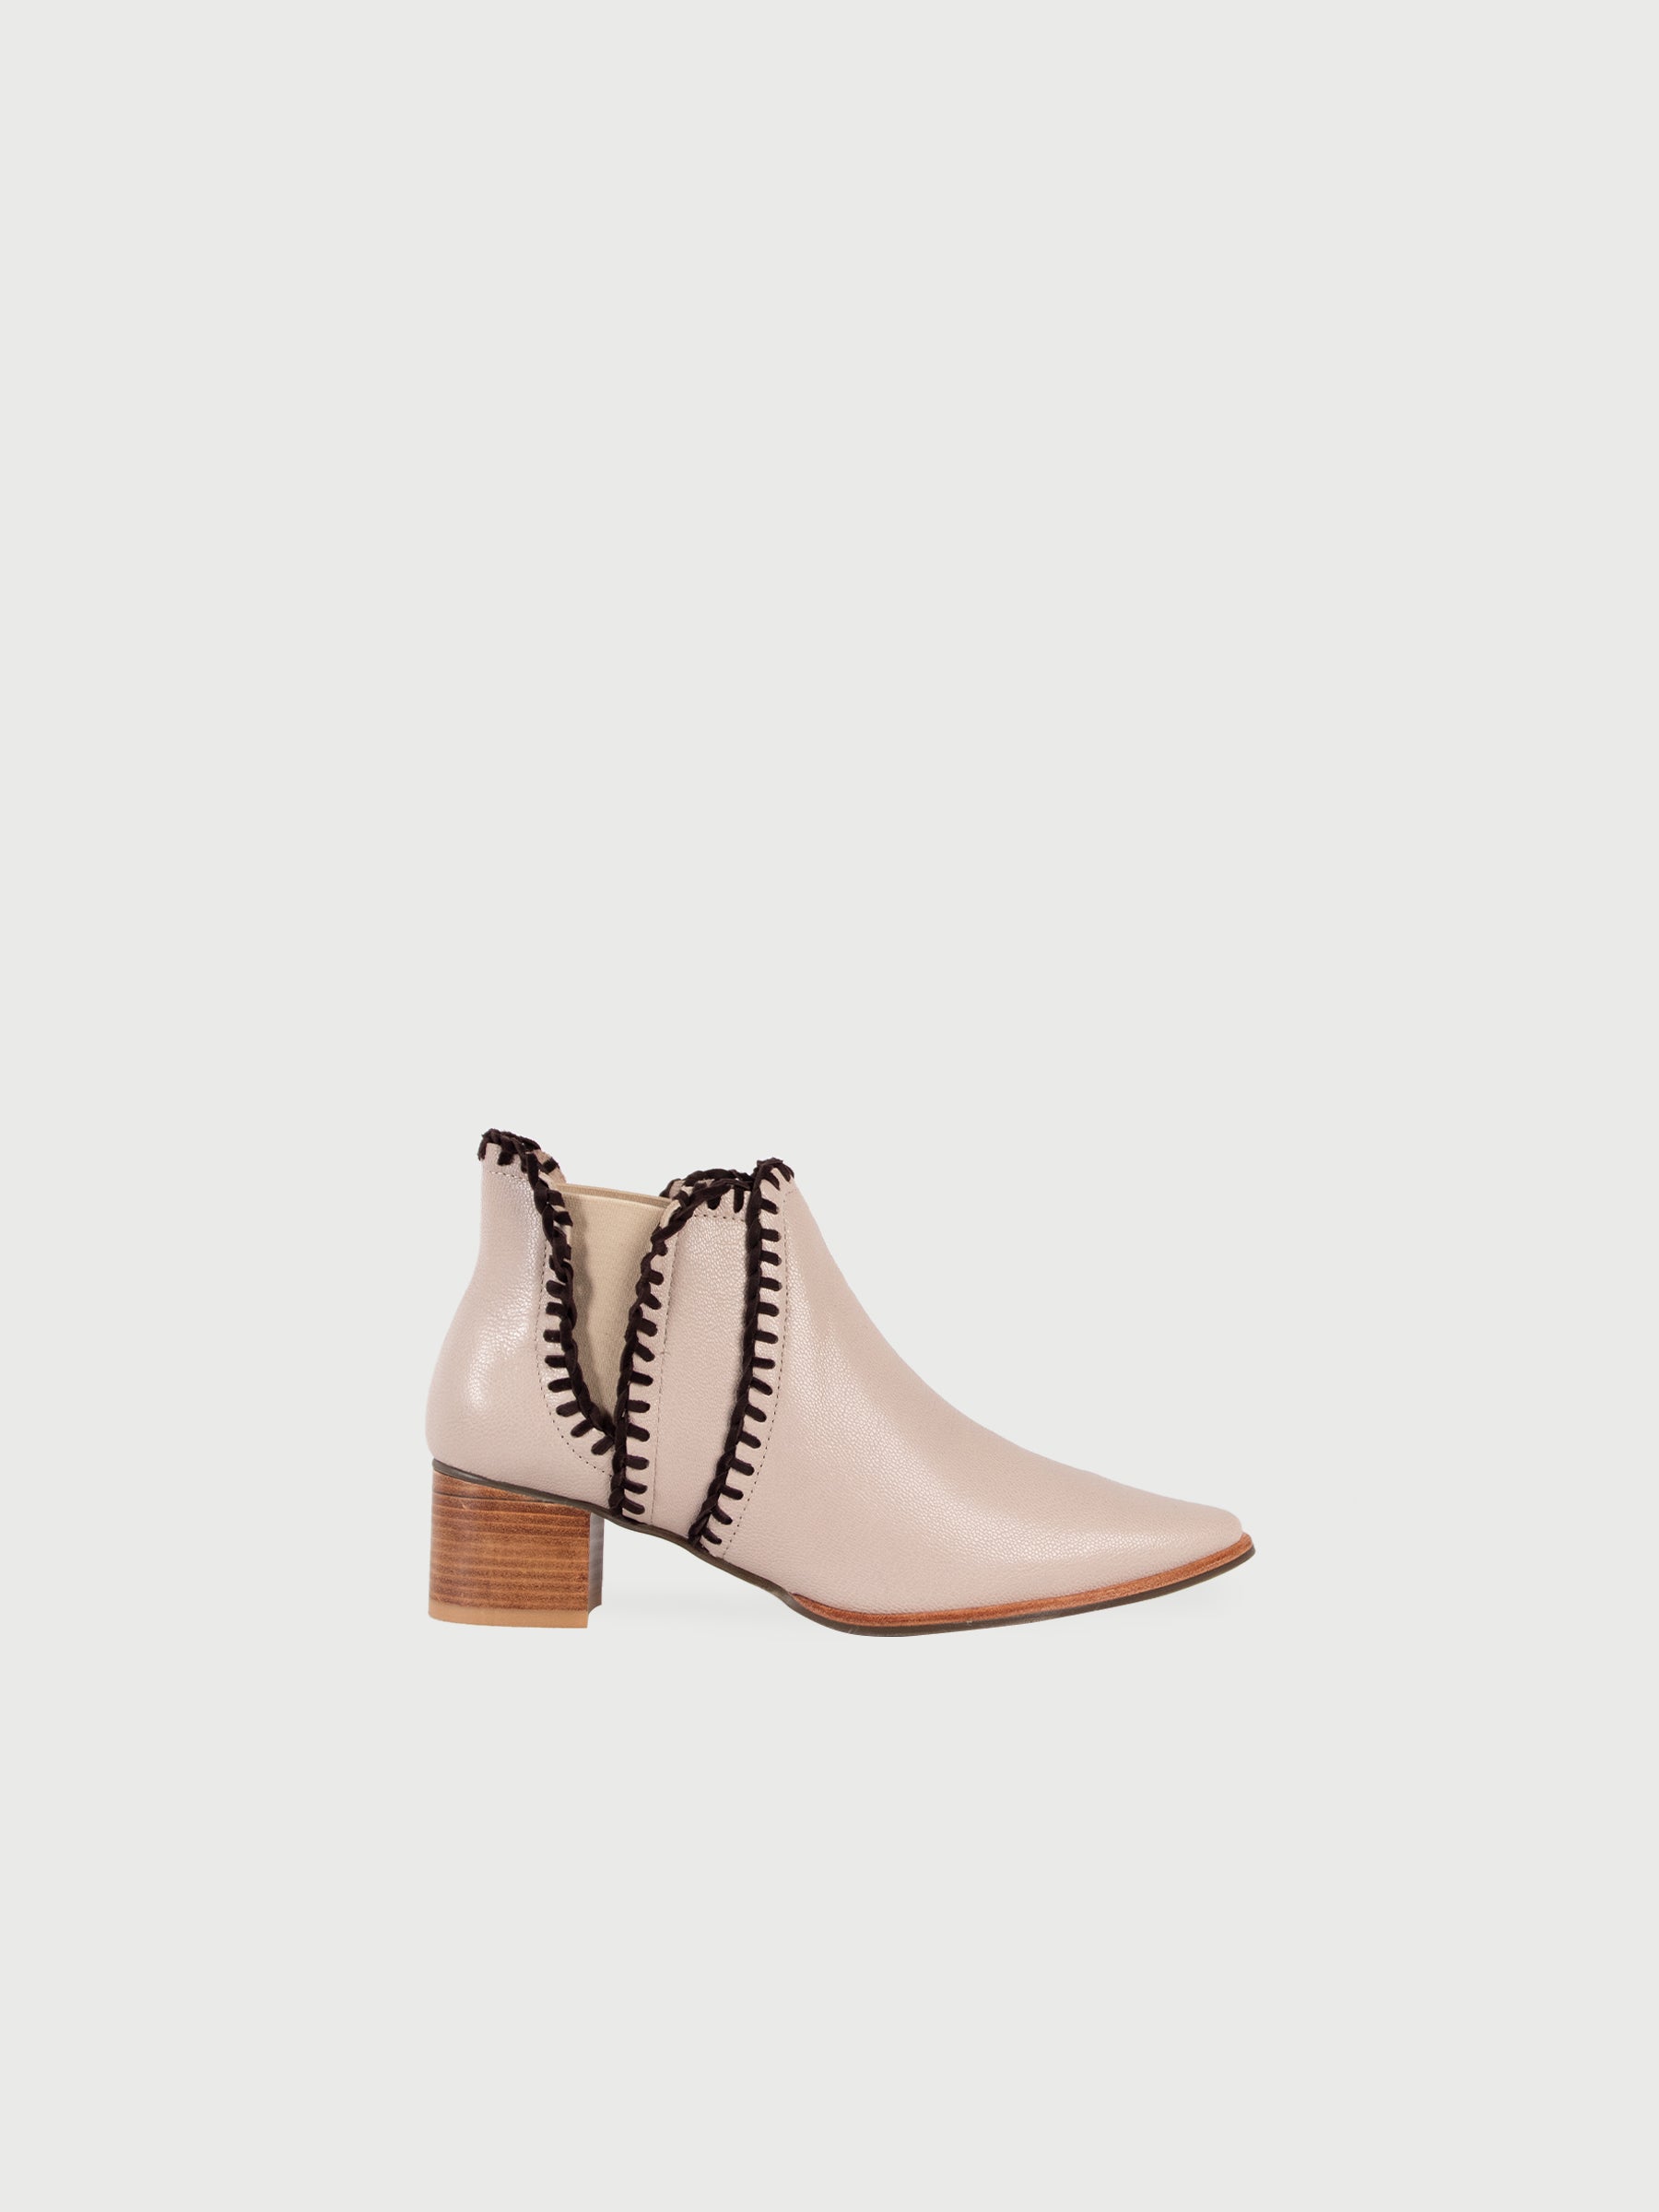 Blanket Stitch Block Heel Leather Ankle Boots